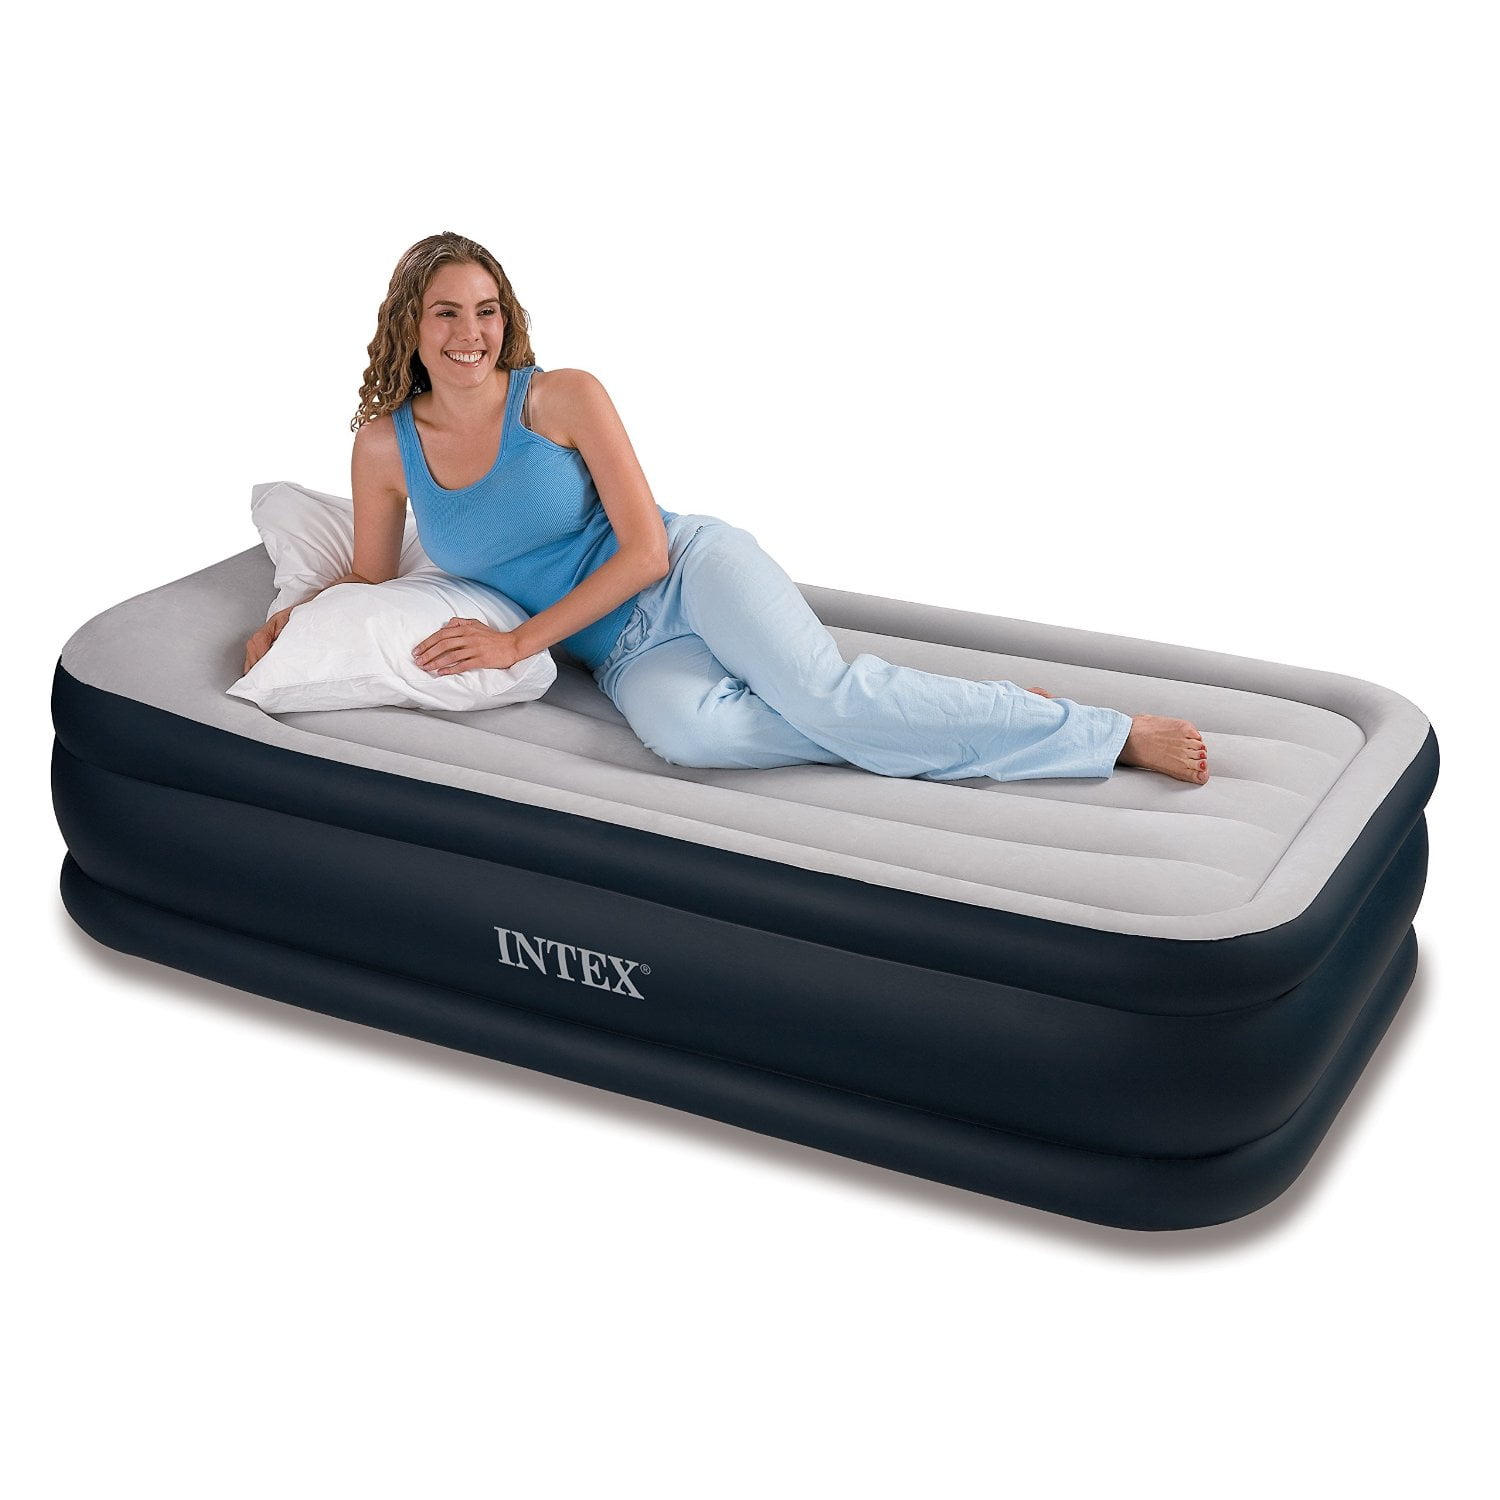 Intex Twin Deluxe Pillow Rest Raised Soft Flocked Air Mattress Bed with Pump 